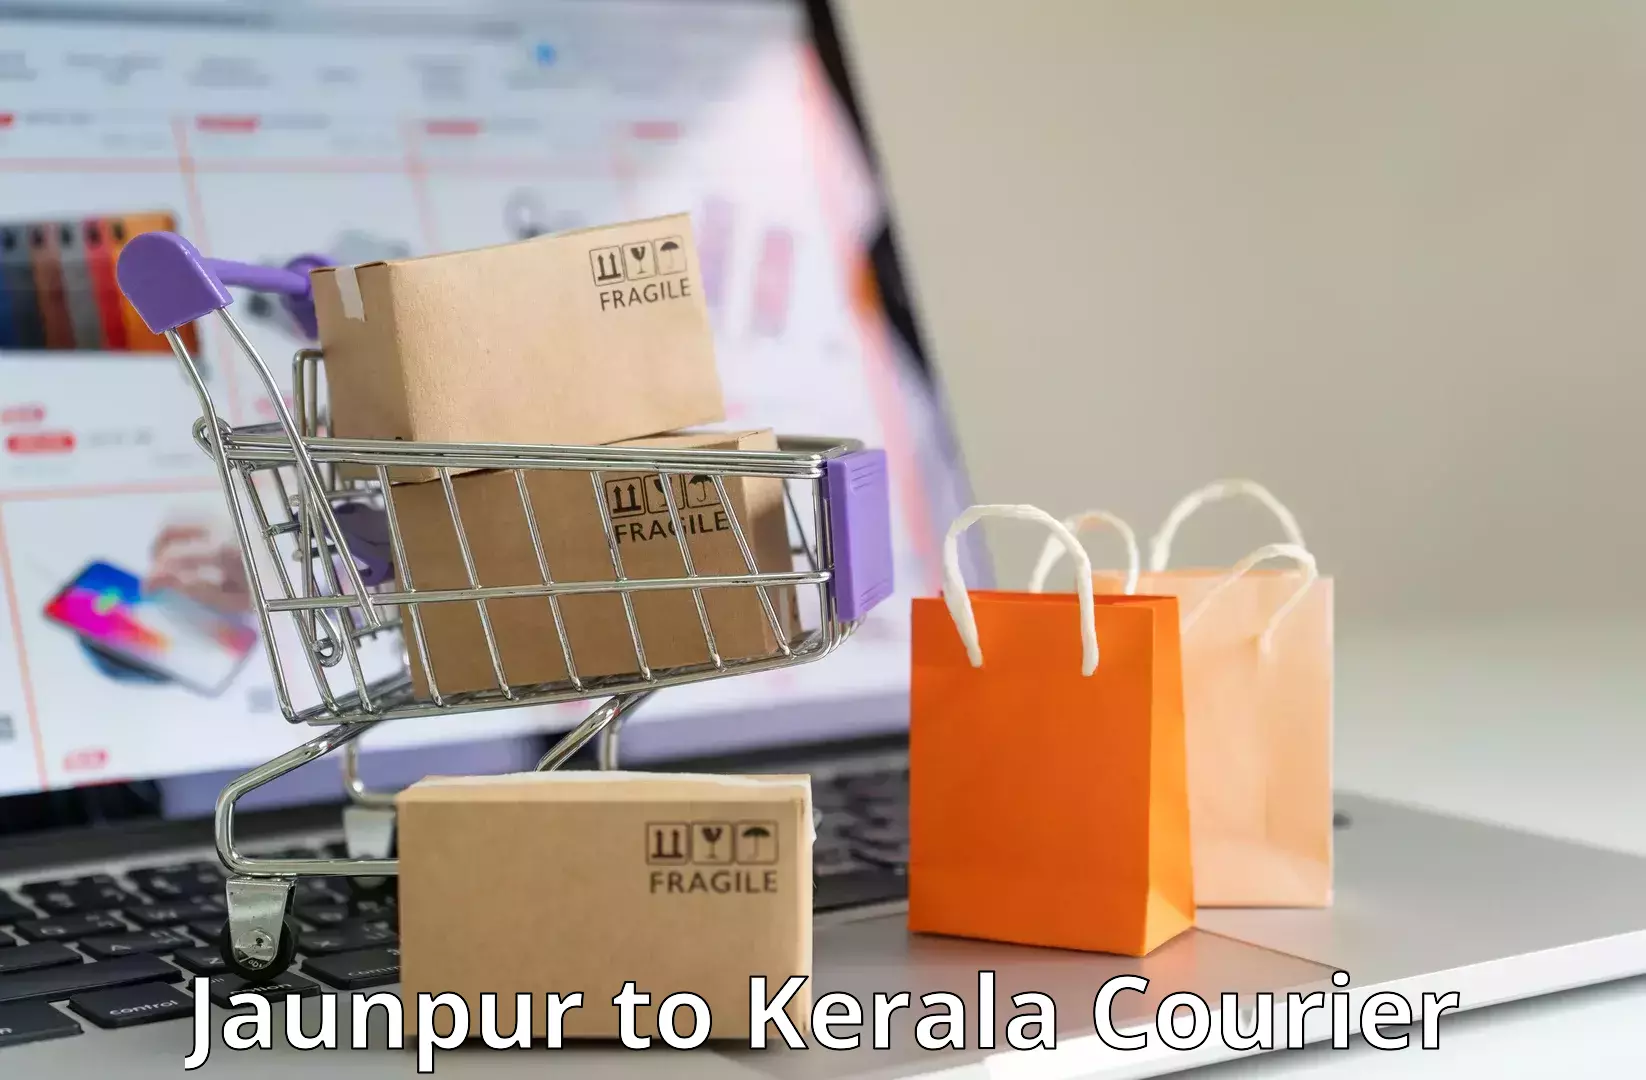 Customer-friendly courier services Jaunpur to Kerala